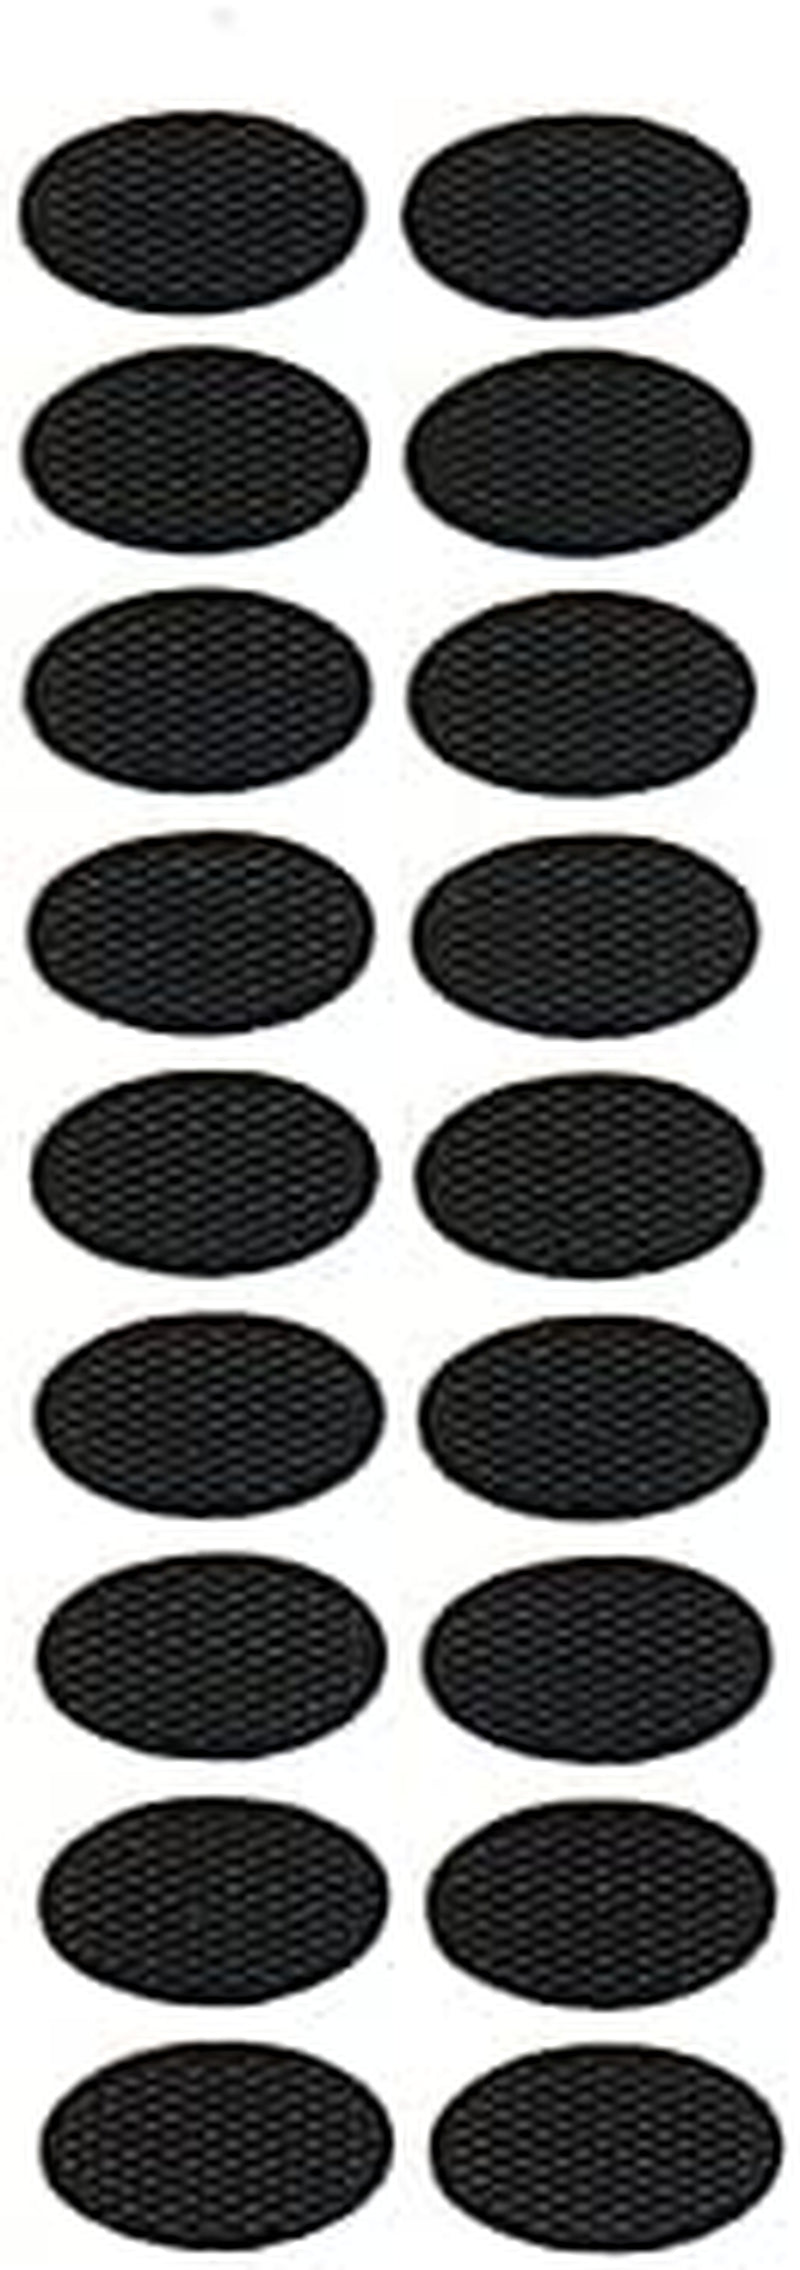 Paxlamb Foam Padding Kit 21PCS Head Protection Liner Inner Protective Pads Bicycle Replacement Pad Cushion Mat Set for Scooter Skateboard Bike Motorcycle Cycling Riding Sport Helmets Sporting Goods > Outdoor Recreation > Cycling > Cycling Apparel & Accessories > Bicycle Helmets PAXLamb   